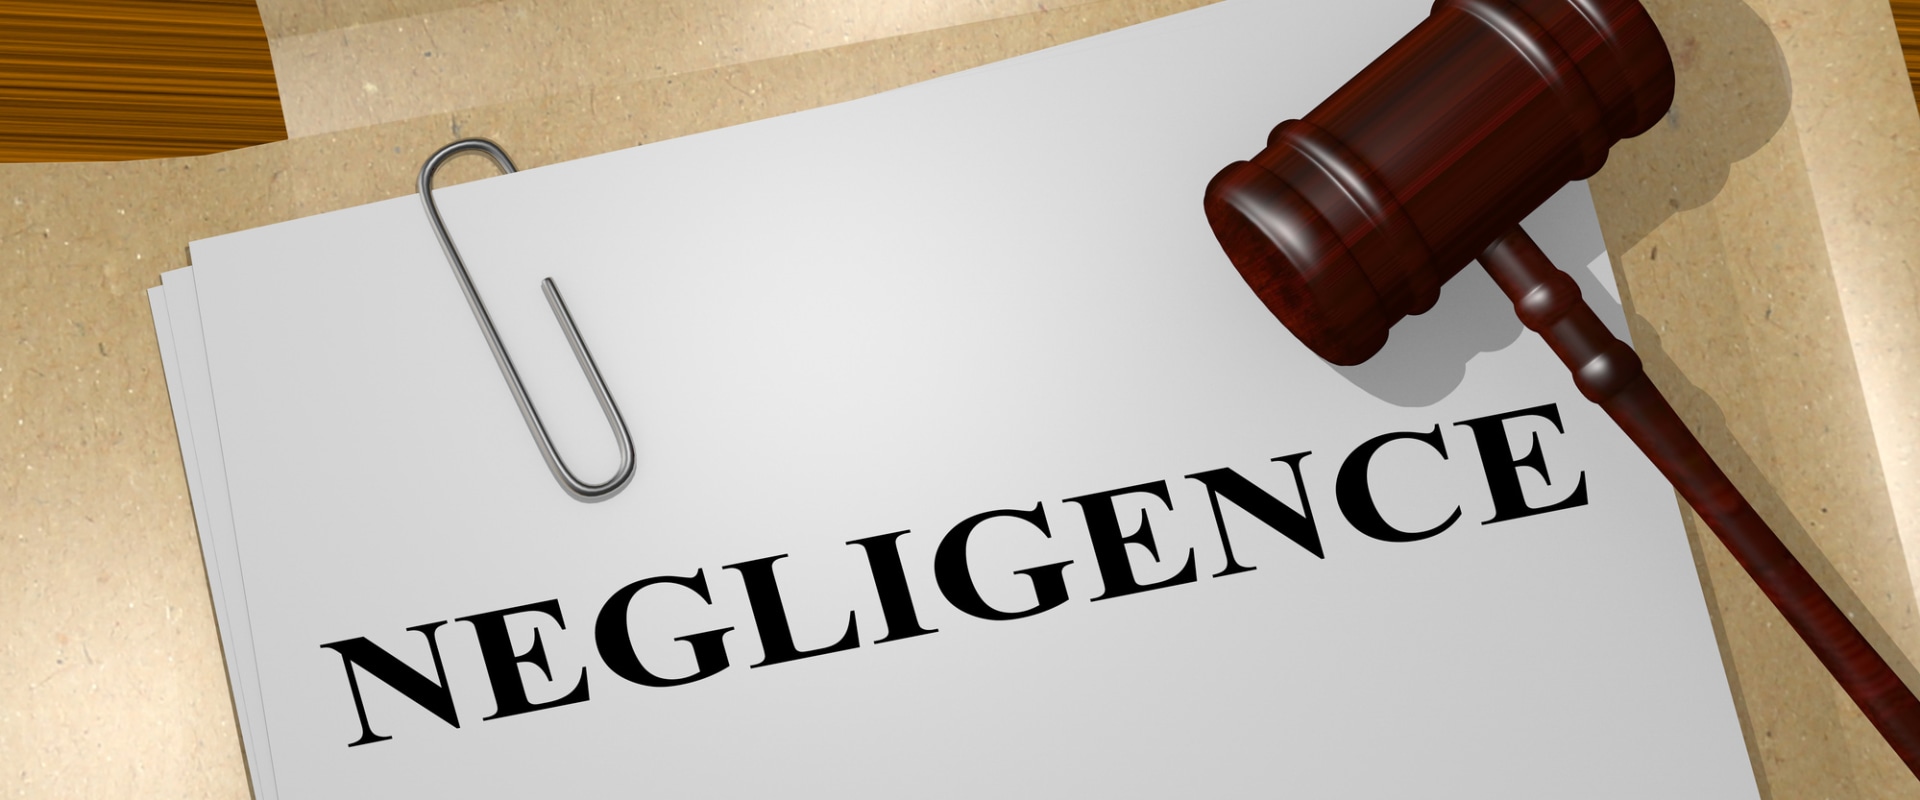 What are the elements of a negligent act?